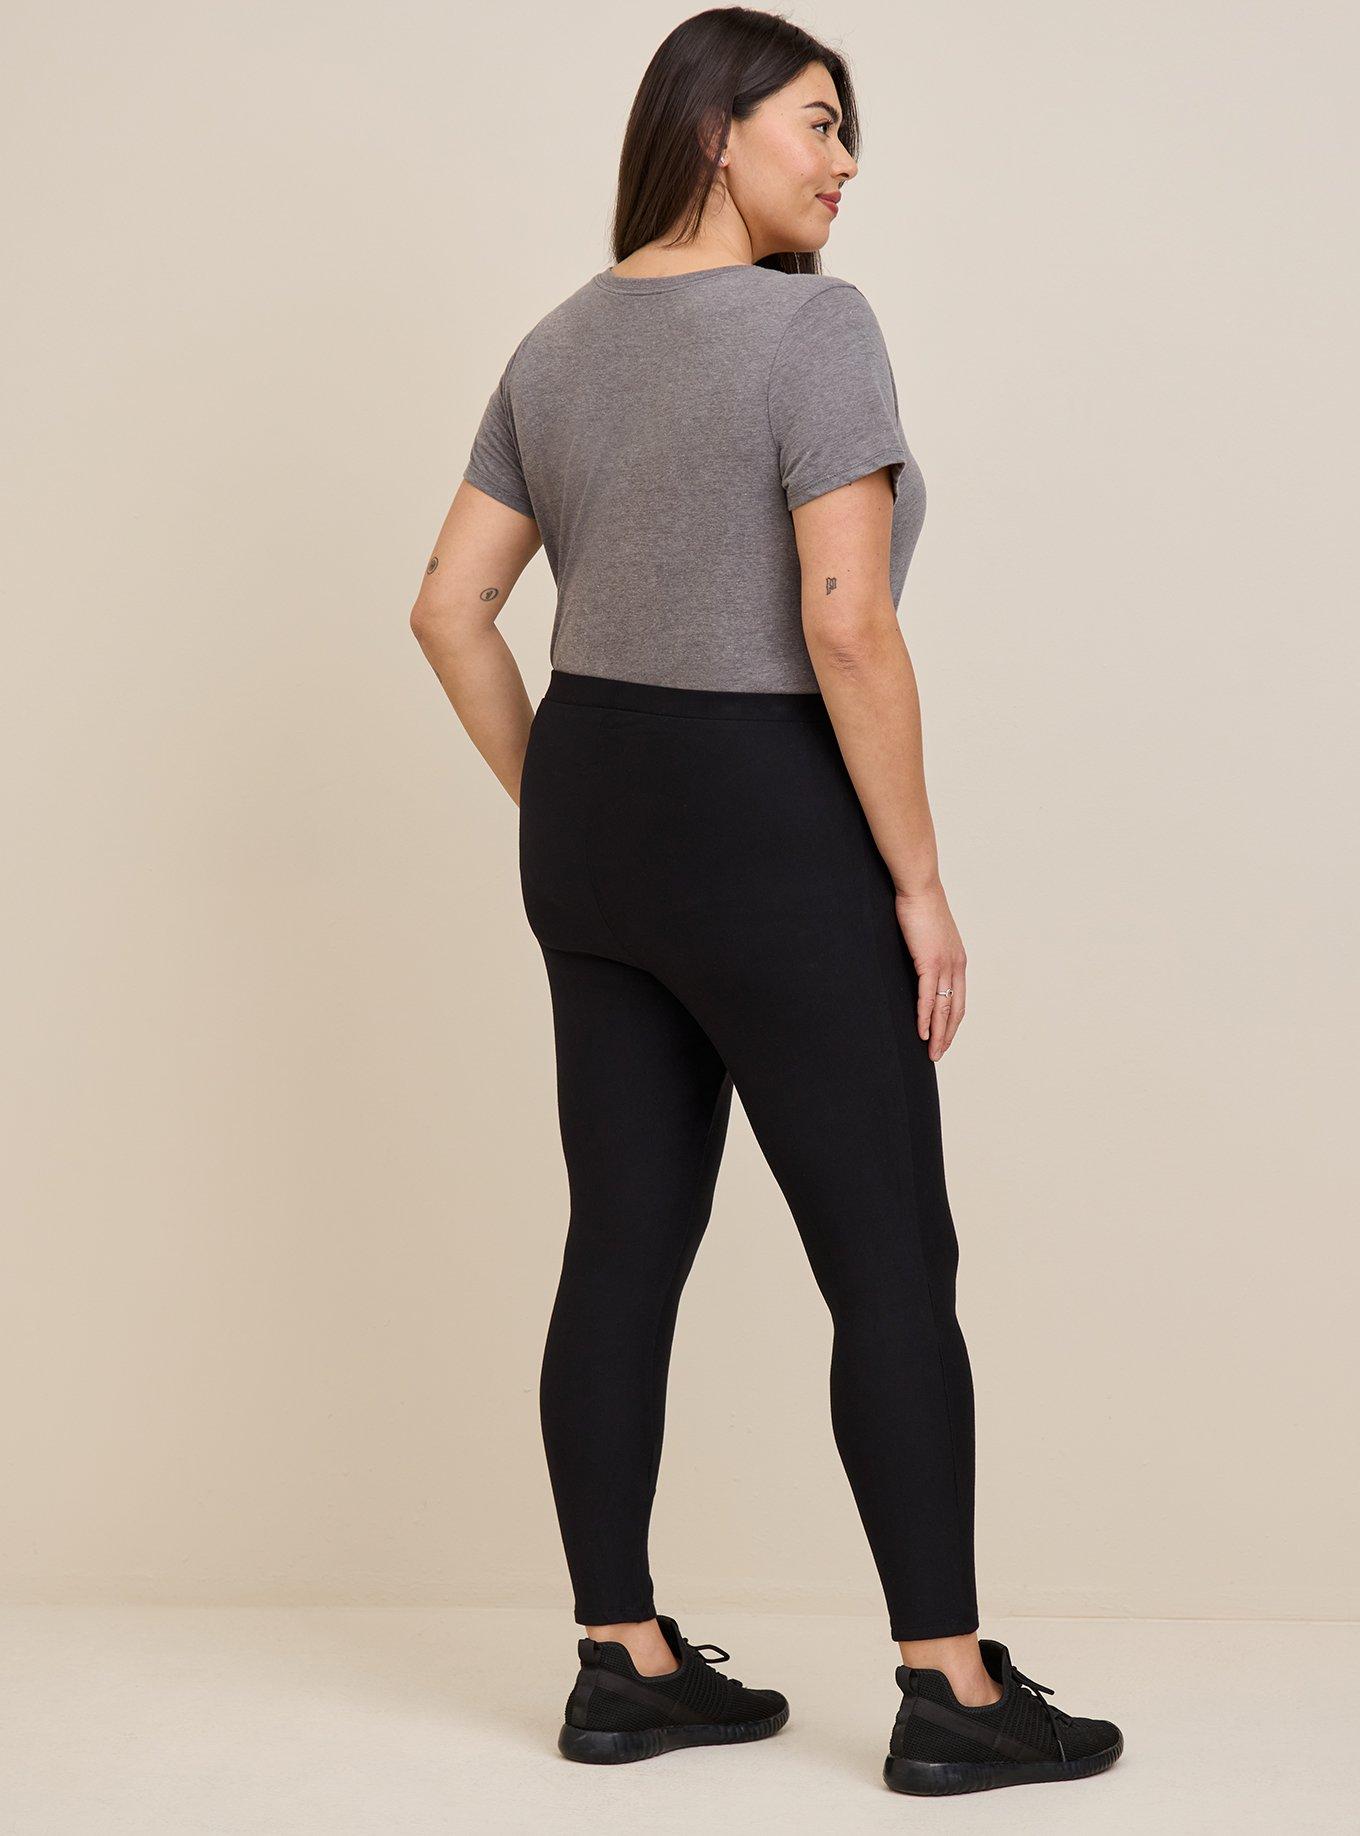 Women's Plus Size Fleece Lined Thermal Tights Black